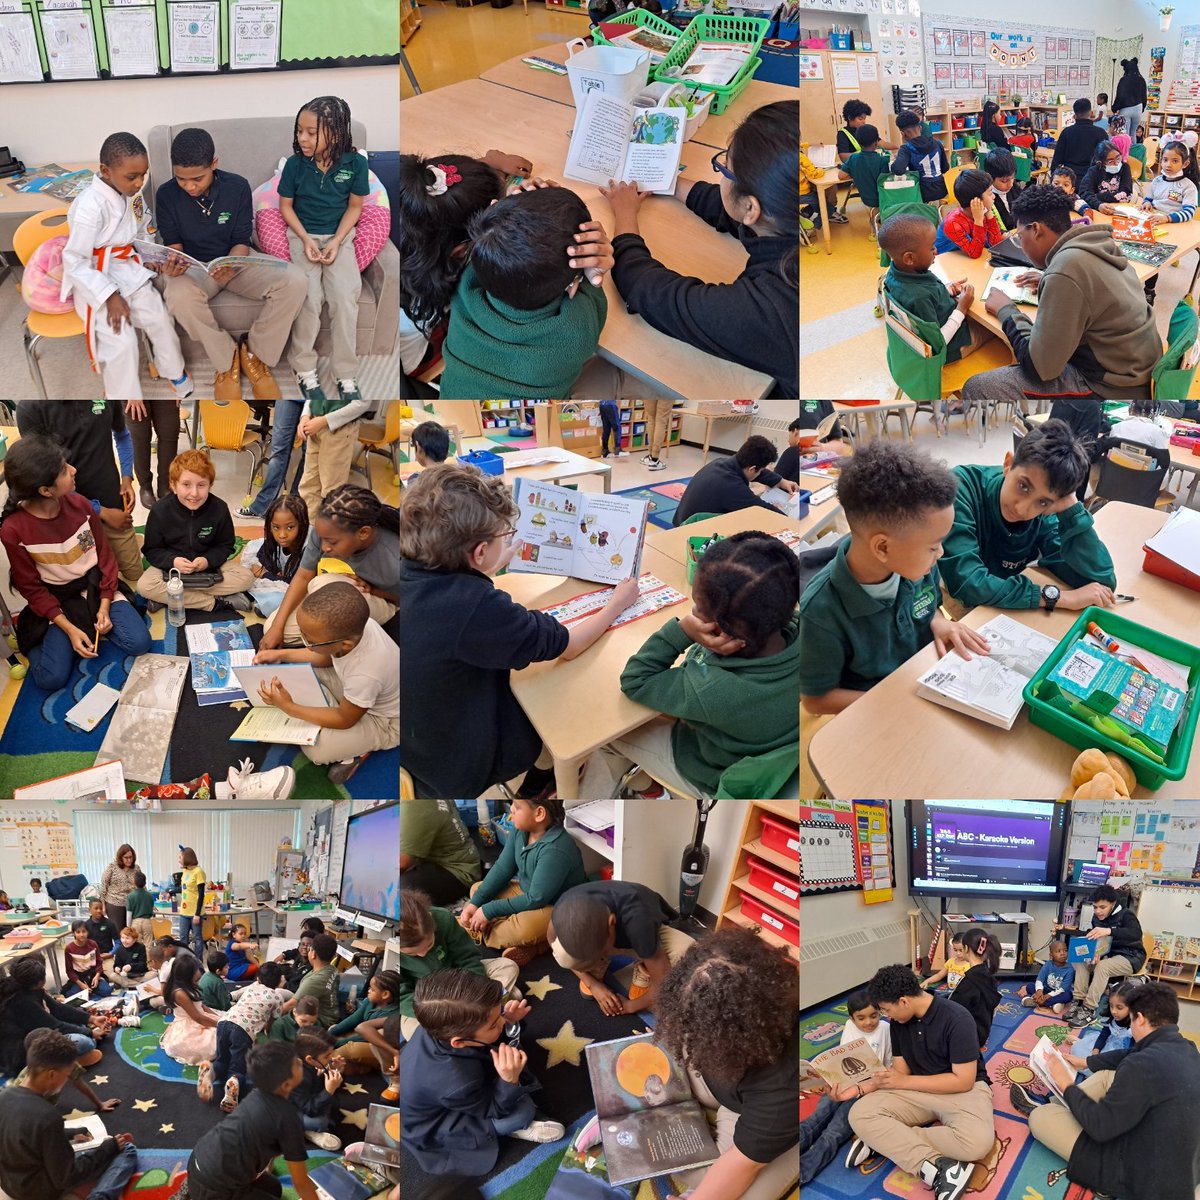 This week, we are celebrating RAA by having a spirit week and sharing our love for Literacy! Today, our 6-8 students engaged in their book buddies project with K-3! My ❤️ is full! #stempride🌱 #literacy📚 @HartfordSuper @corinne_barney @msboratko @STEMEdCT @Hartford_Public